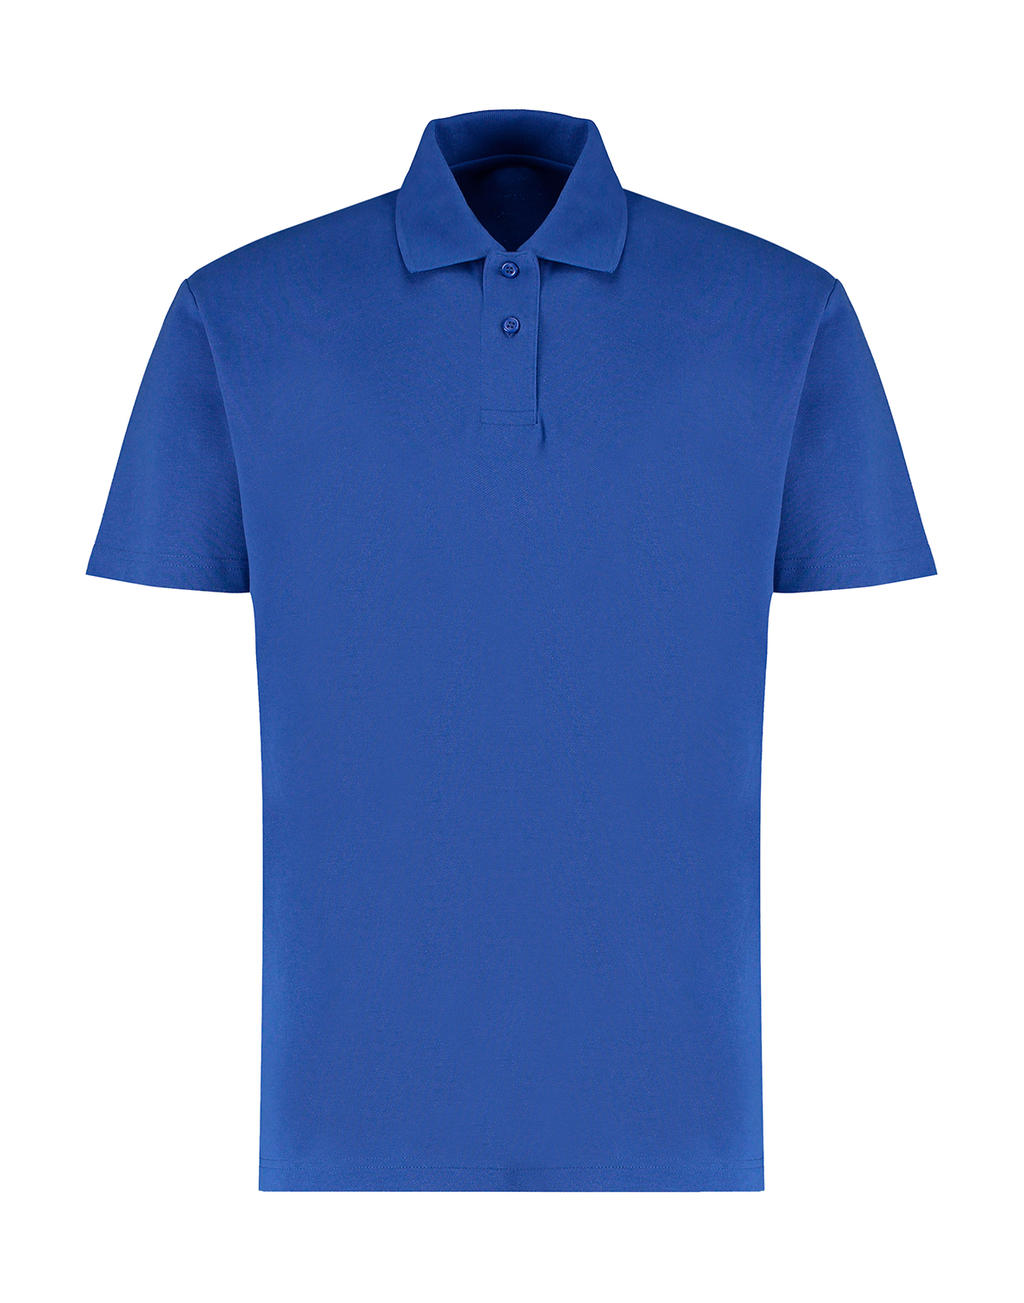  Mens Regular Fit Workforce Polo in Farbe Royal